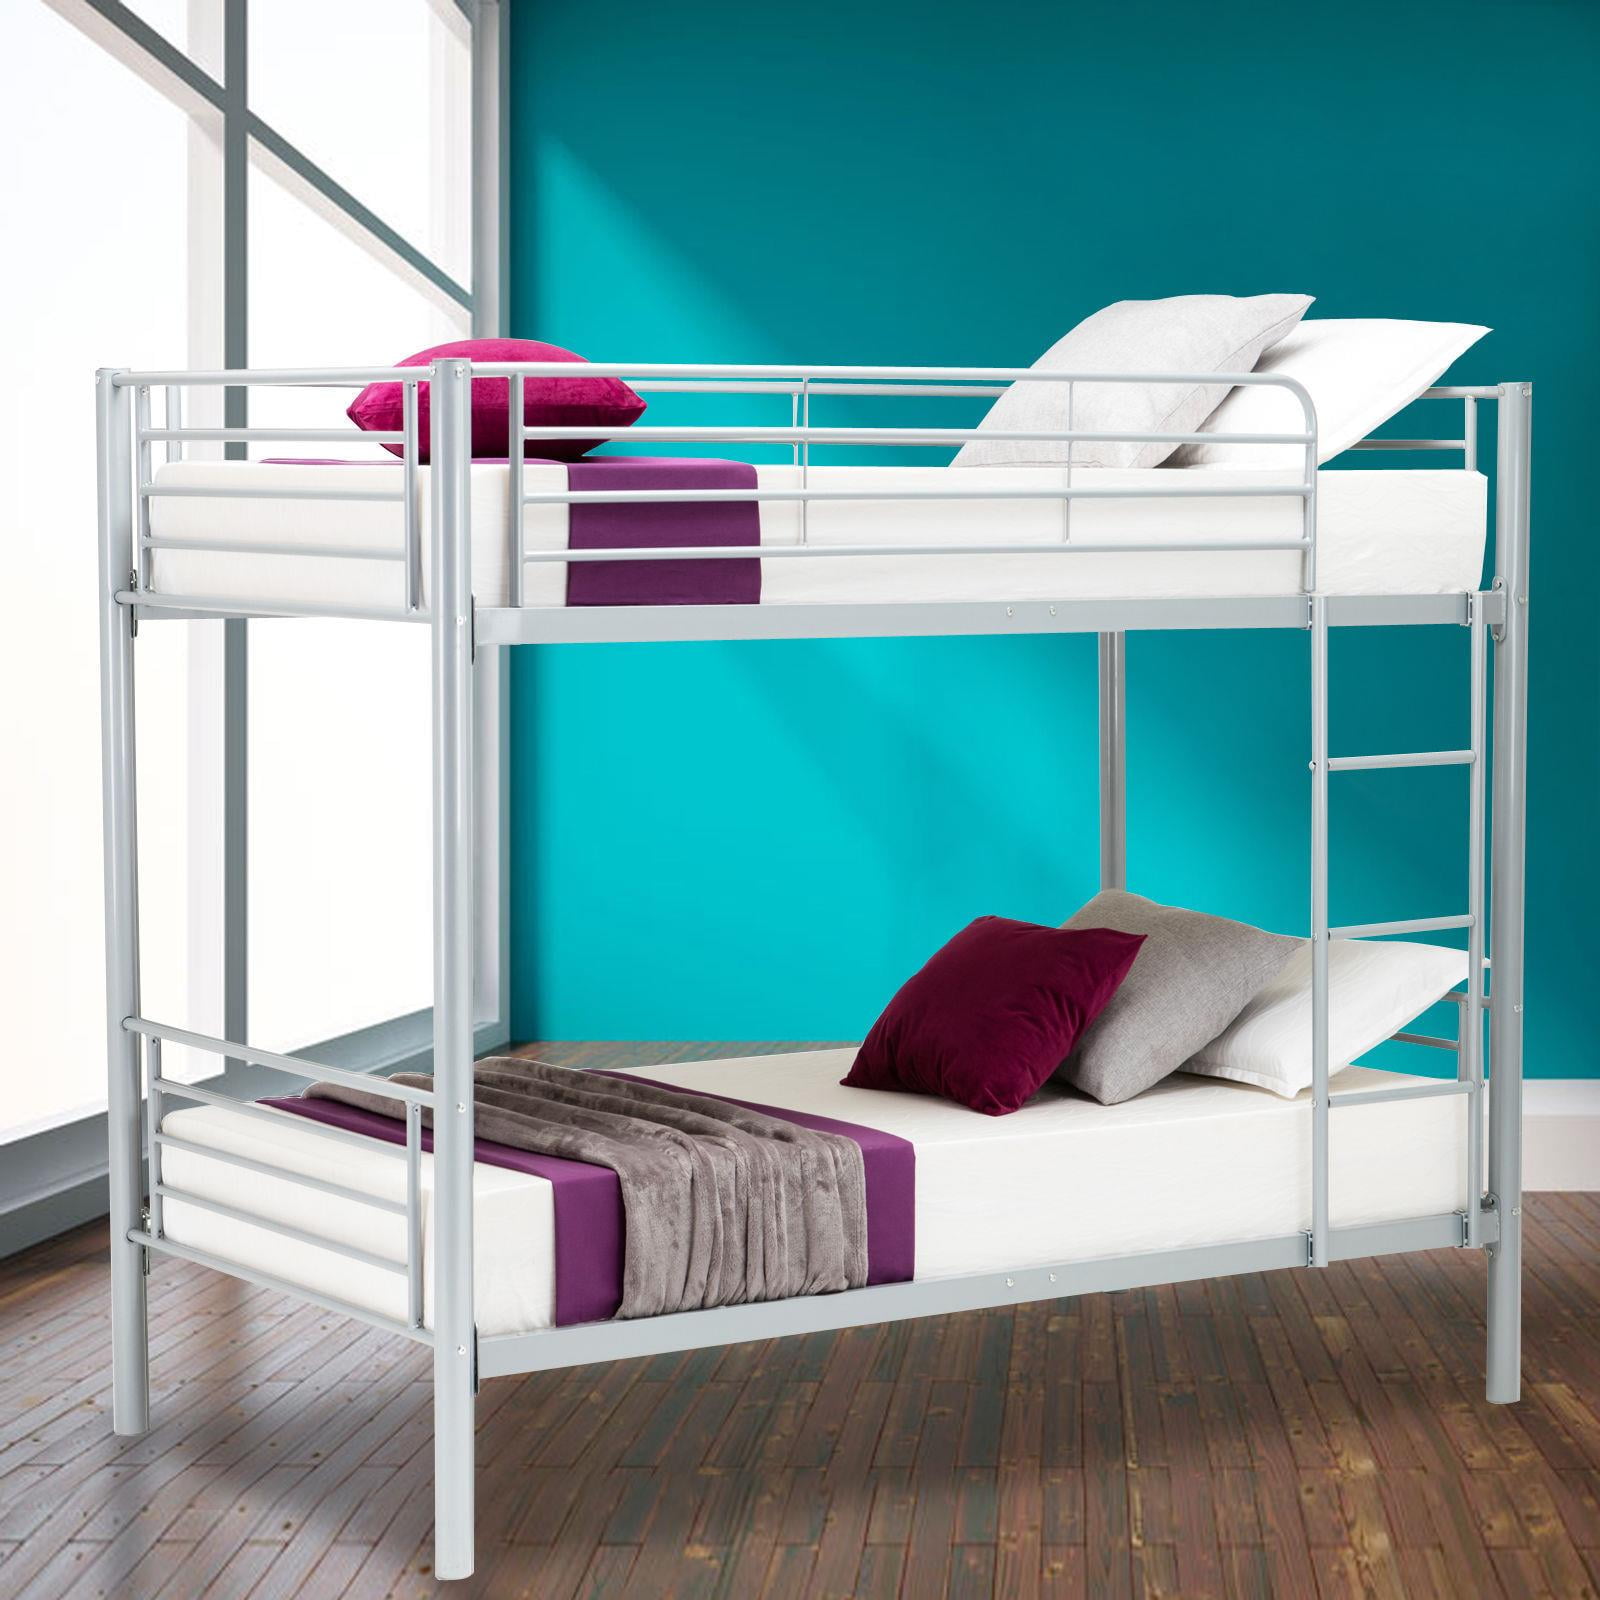 Ktaxon Twin Over Twin Metal Bunk Beds Frame Kids Adult Children Bedroom Furniture With Ladder 33b645a9 3983 4d74 817b 14cf33bed6df 1.aa9241a45ce4ab0dd6df147312eb55a0 